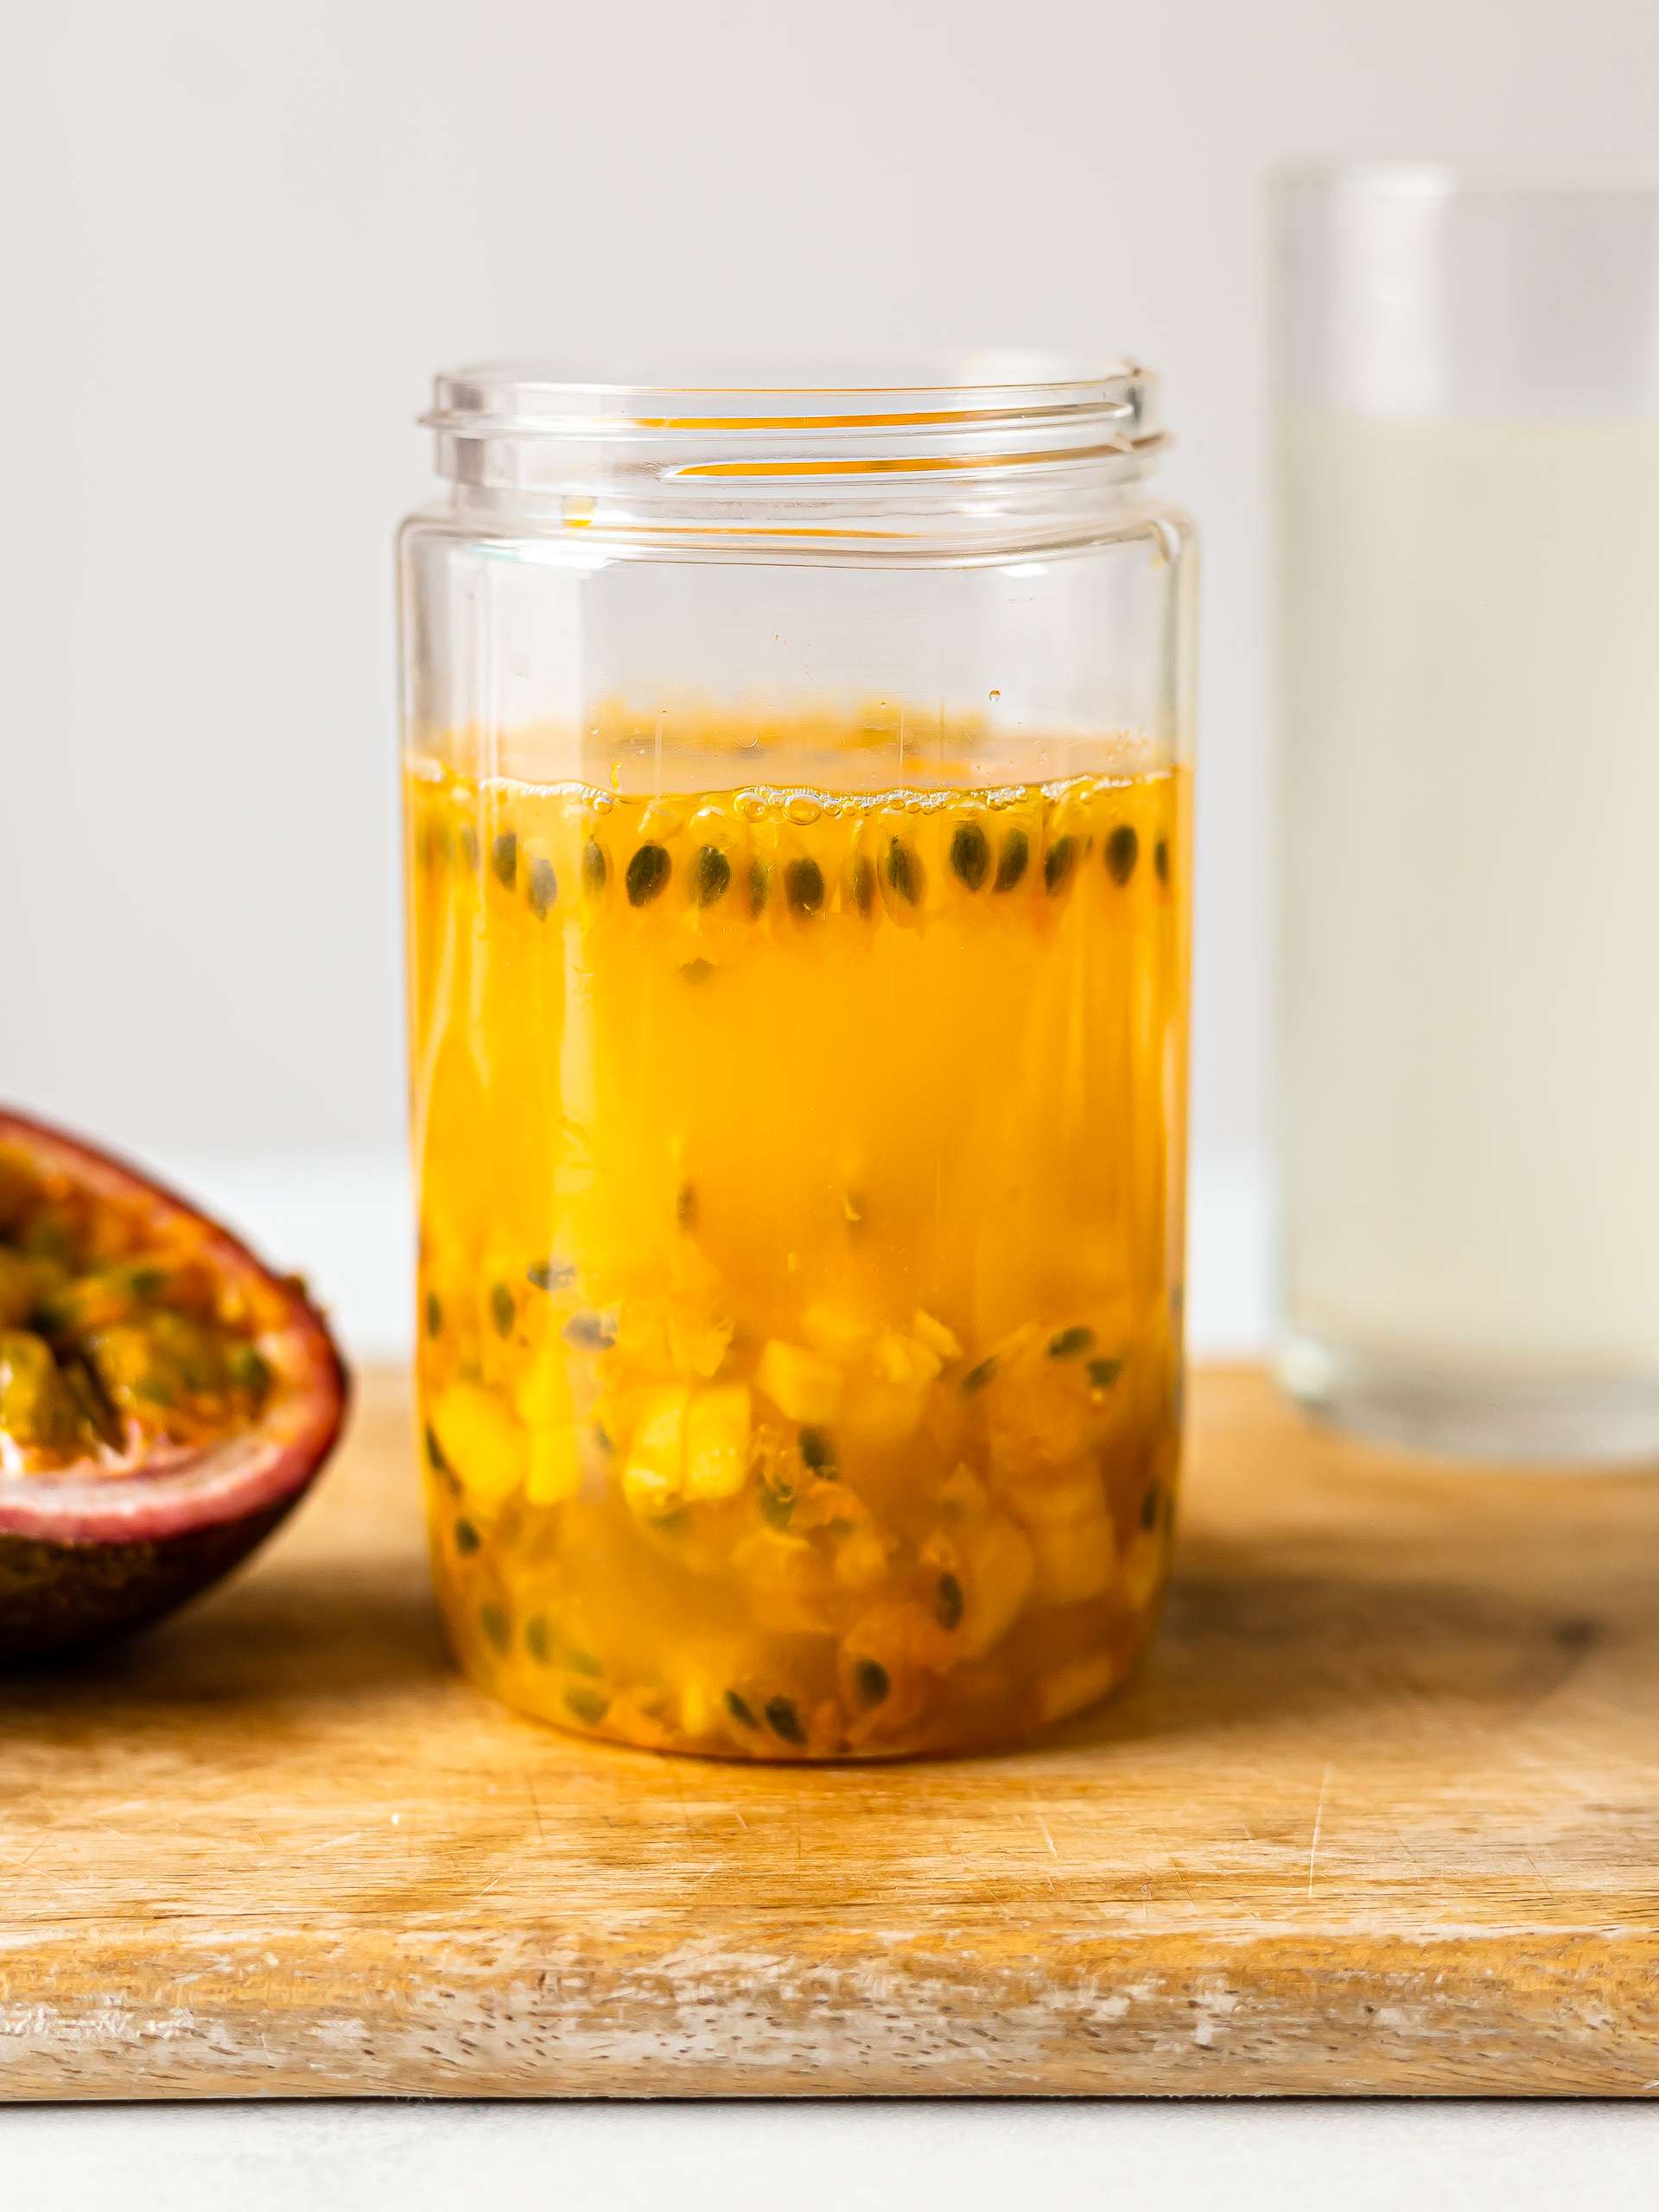 jackfruit and passion fruit in a glass for smoothie